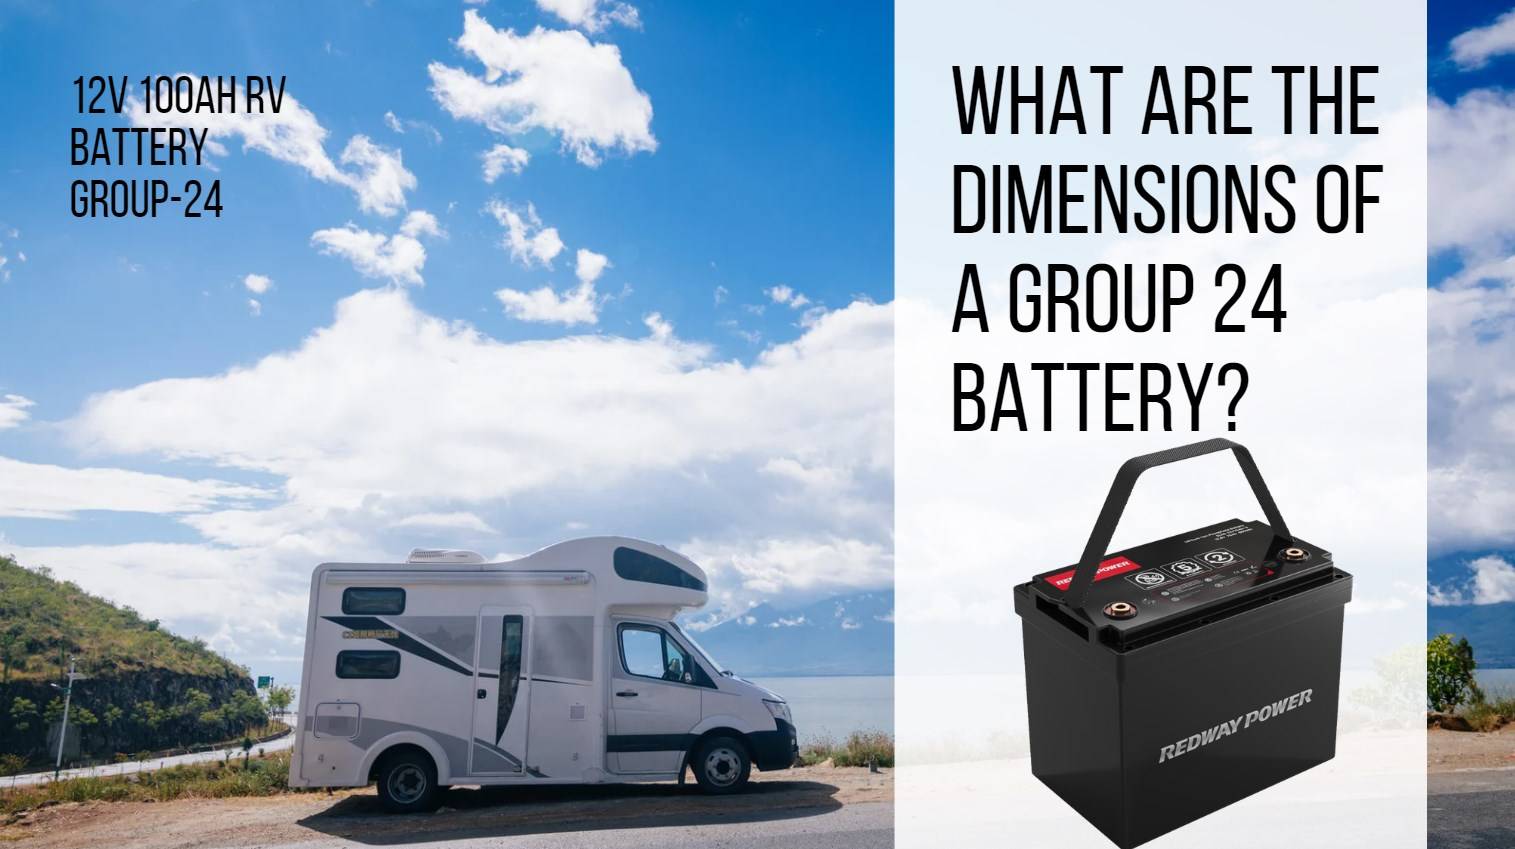 What are the dimensions of a group 24 battery? BCI Group 24 vs Group 27. 12v 100ah lifepo4 battery rv